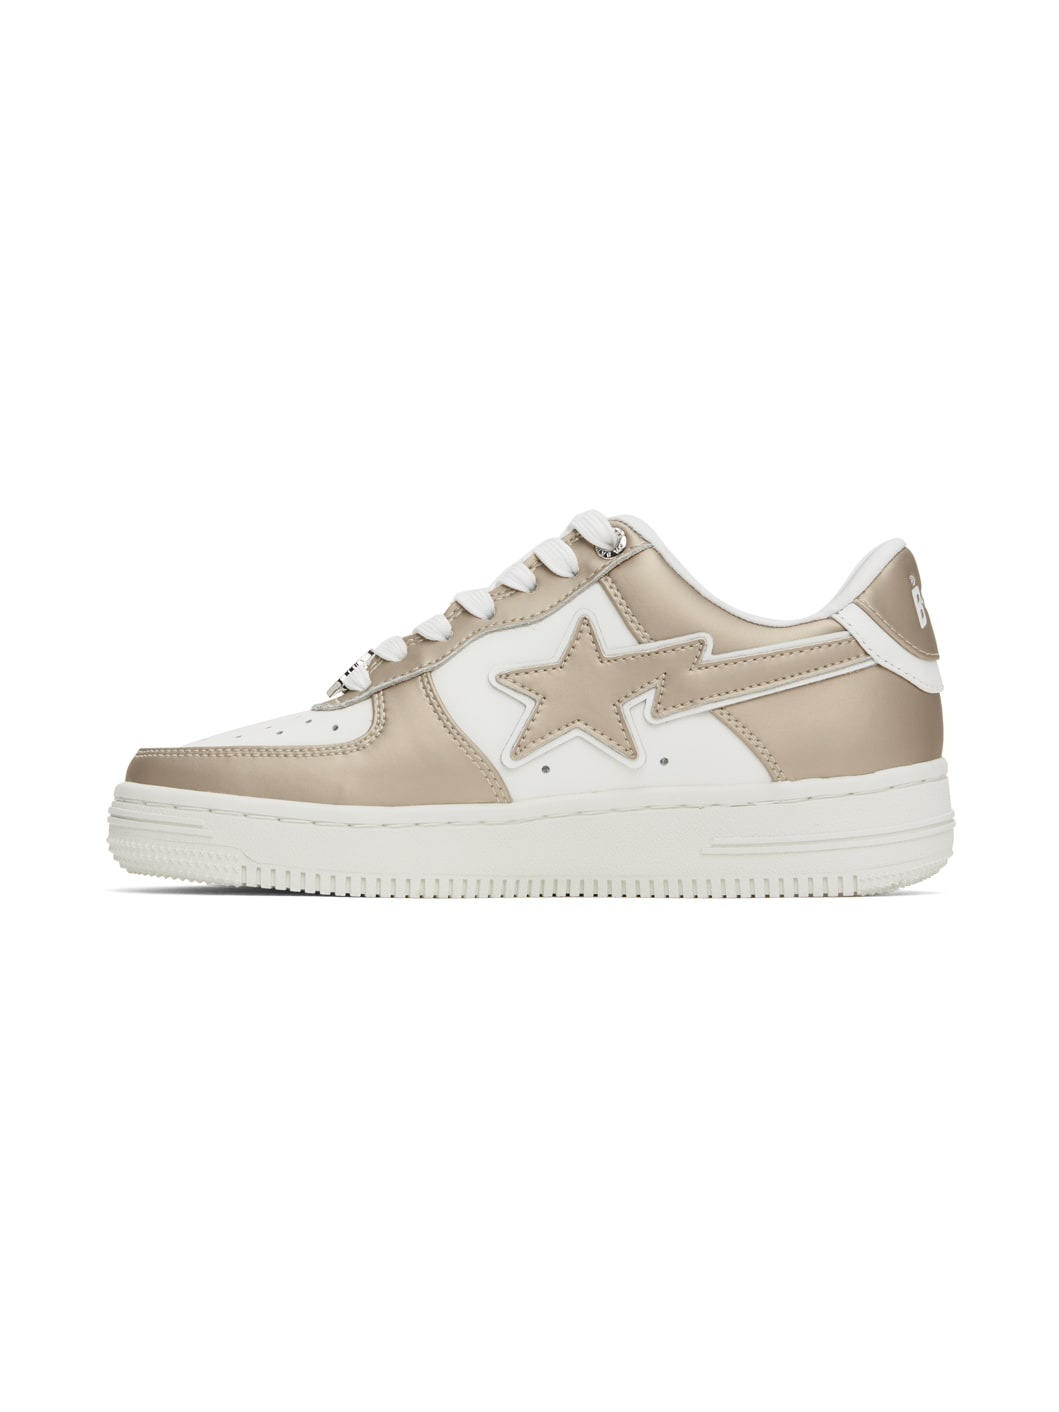 White & Gold STA #4 Sneakers - 3